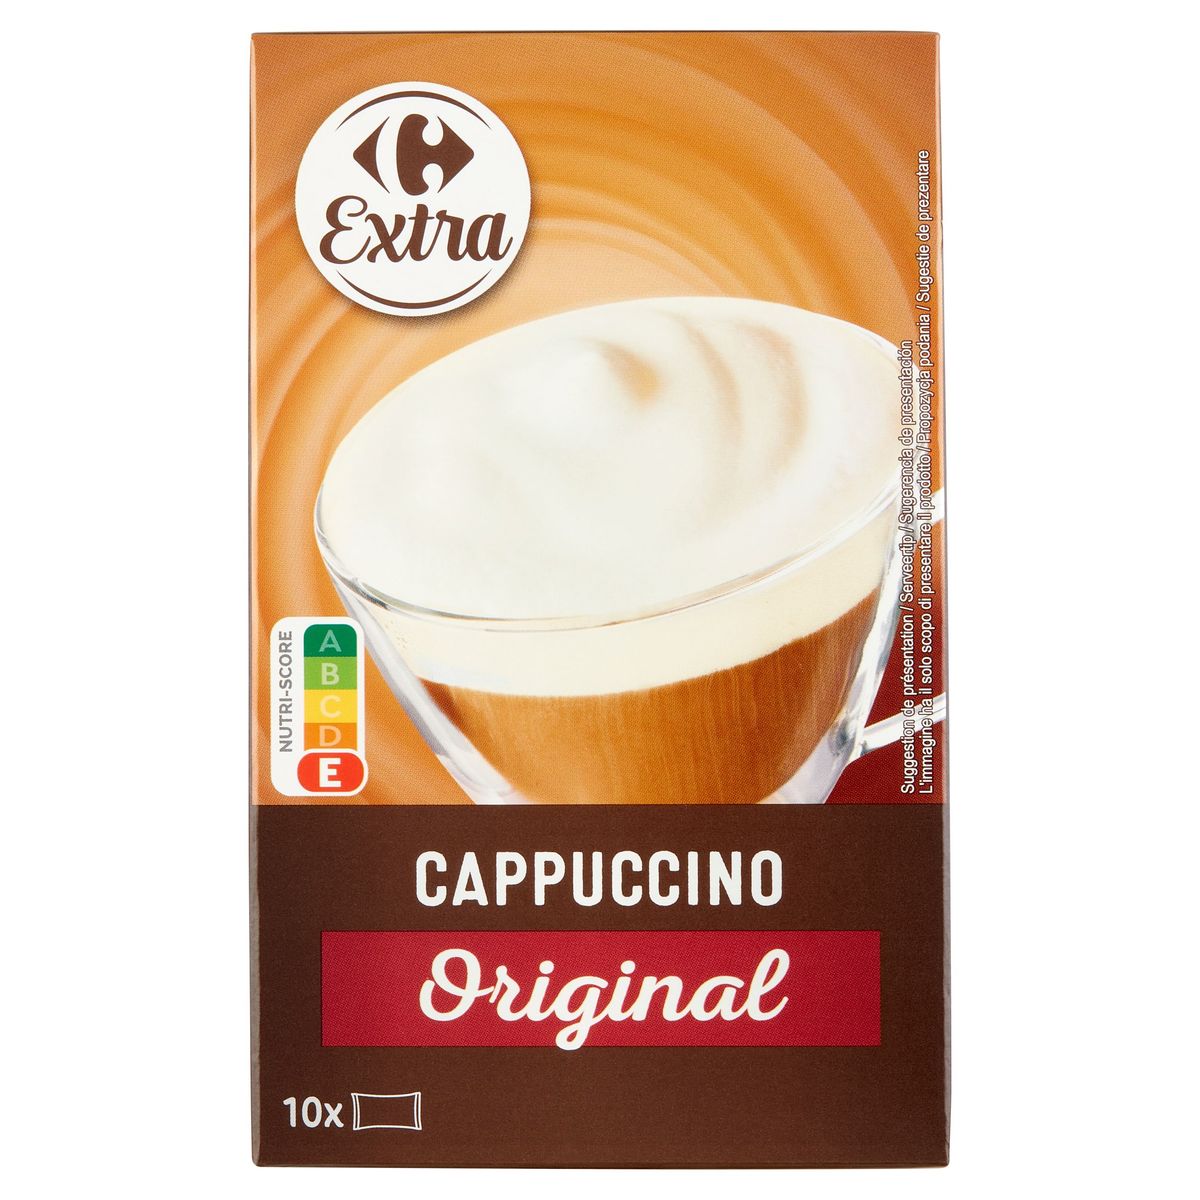 Carrefour Extra Cappuccino 10 x 14 g